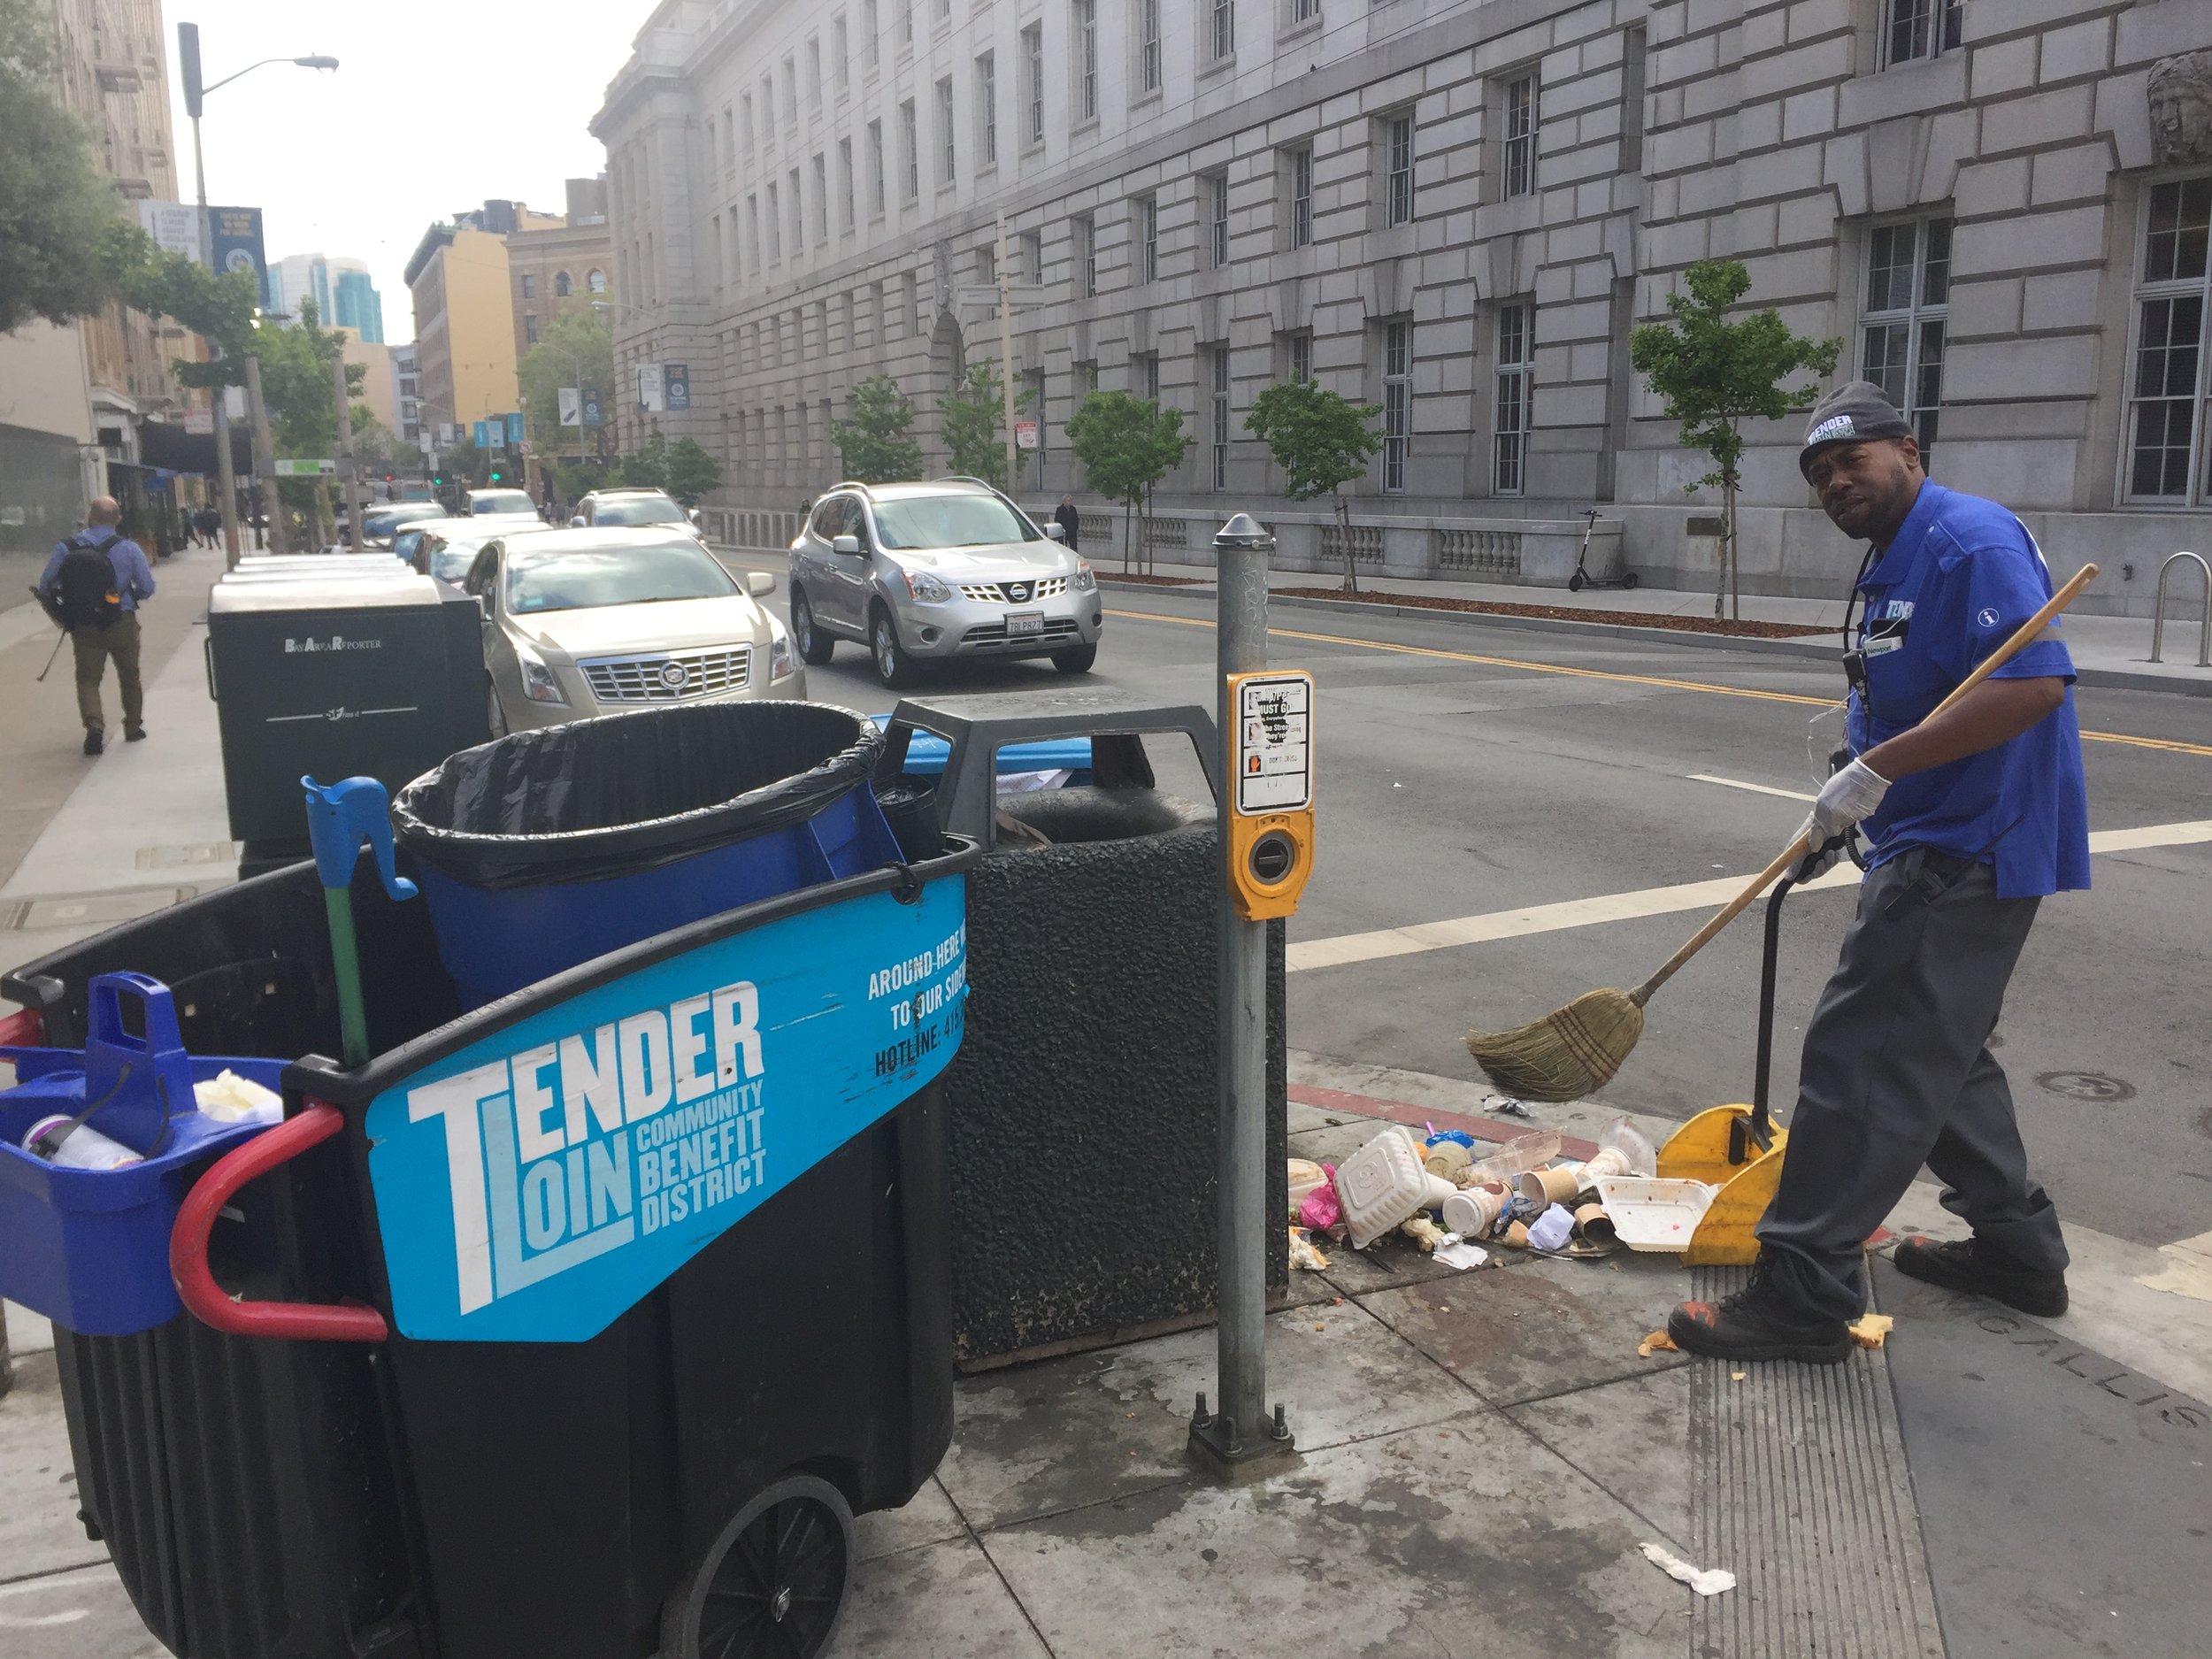 TLCBD Clean Team member, Maurice "Mo" Jackson, removes debris from an overturned trash can.